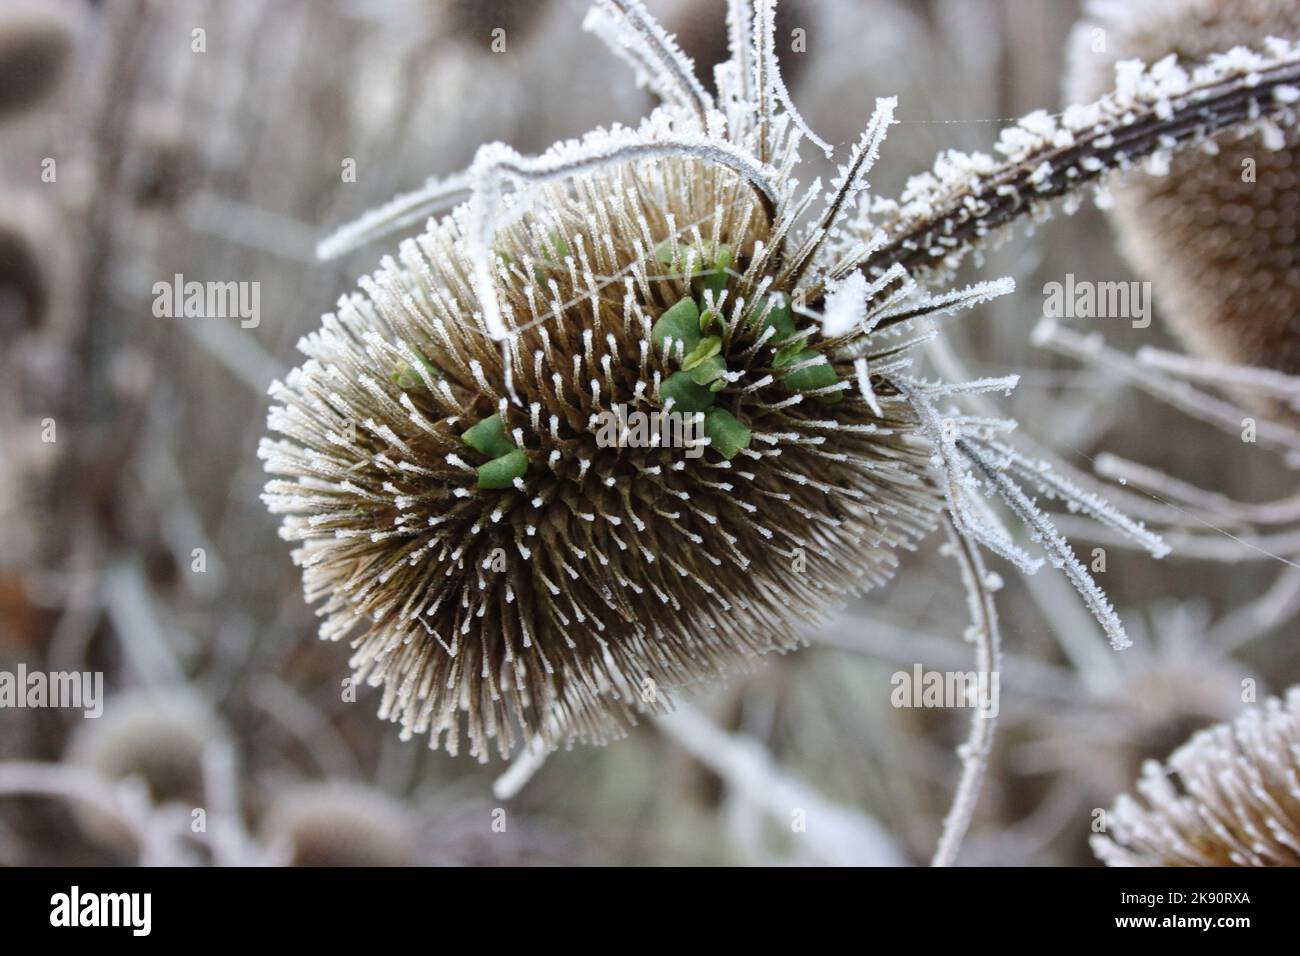 Teasel(Dipsacus sativus) seedhead layered in frost. Stock Photo